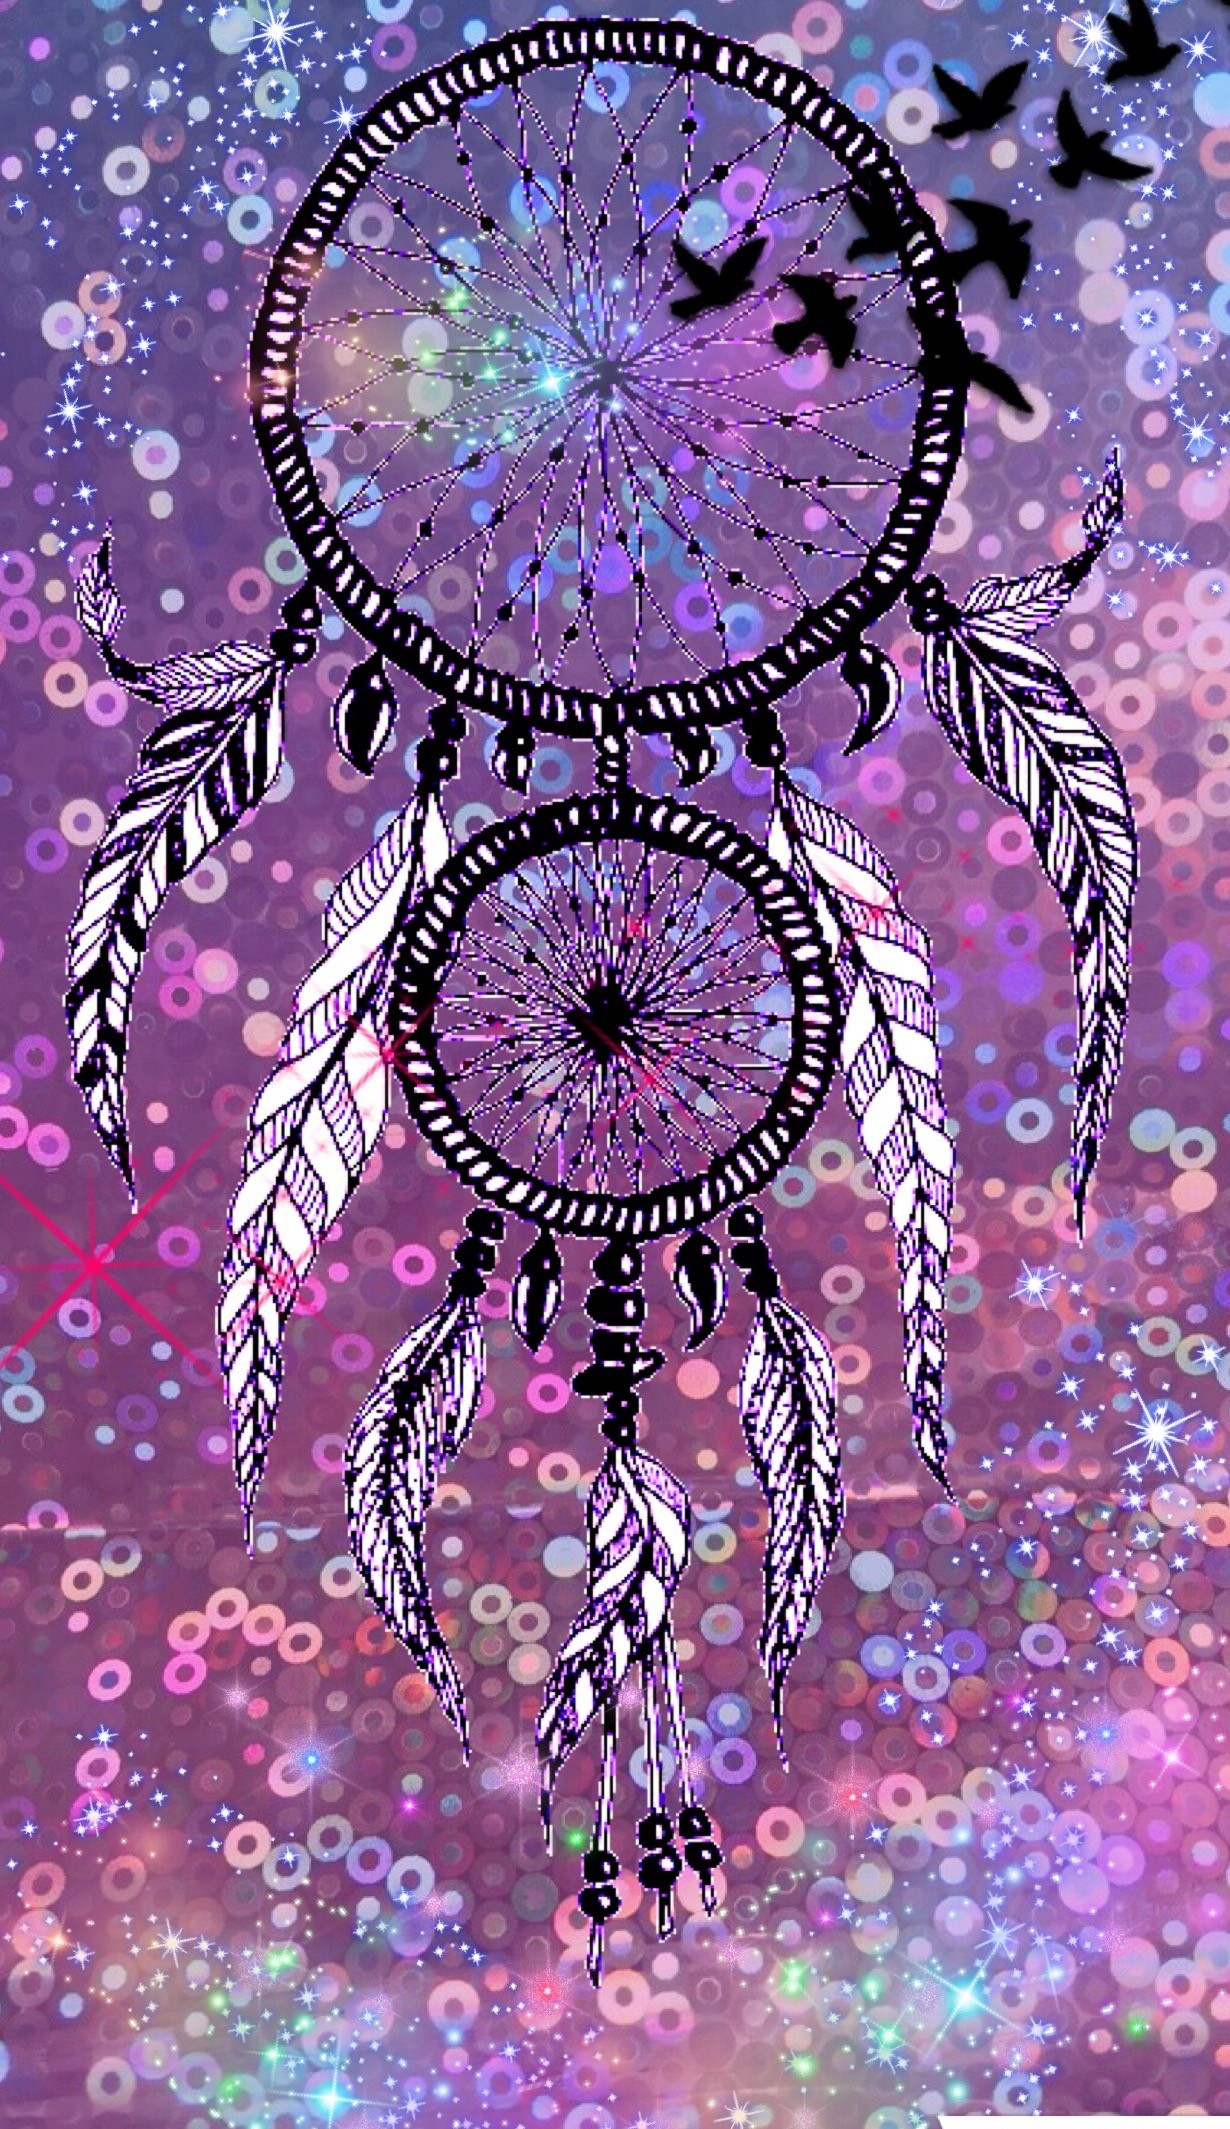 Dreamcatcher Wallpaper Hd - Background For Phone Girly , HD Wallpaper & Backgrounds